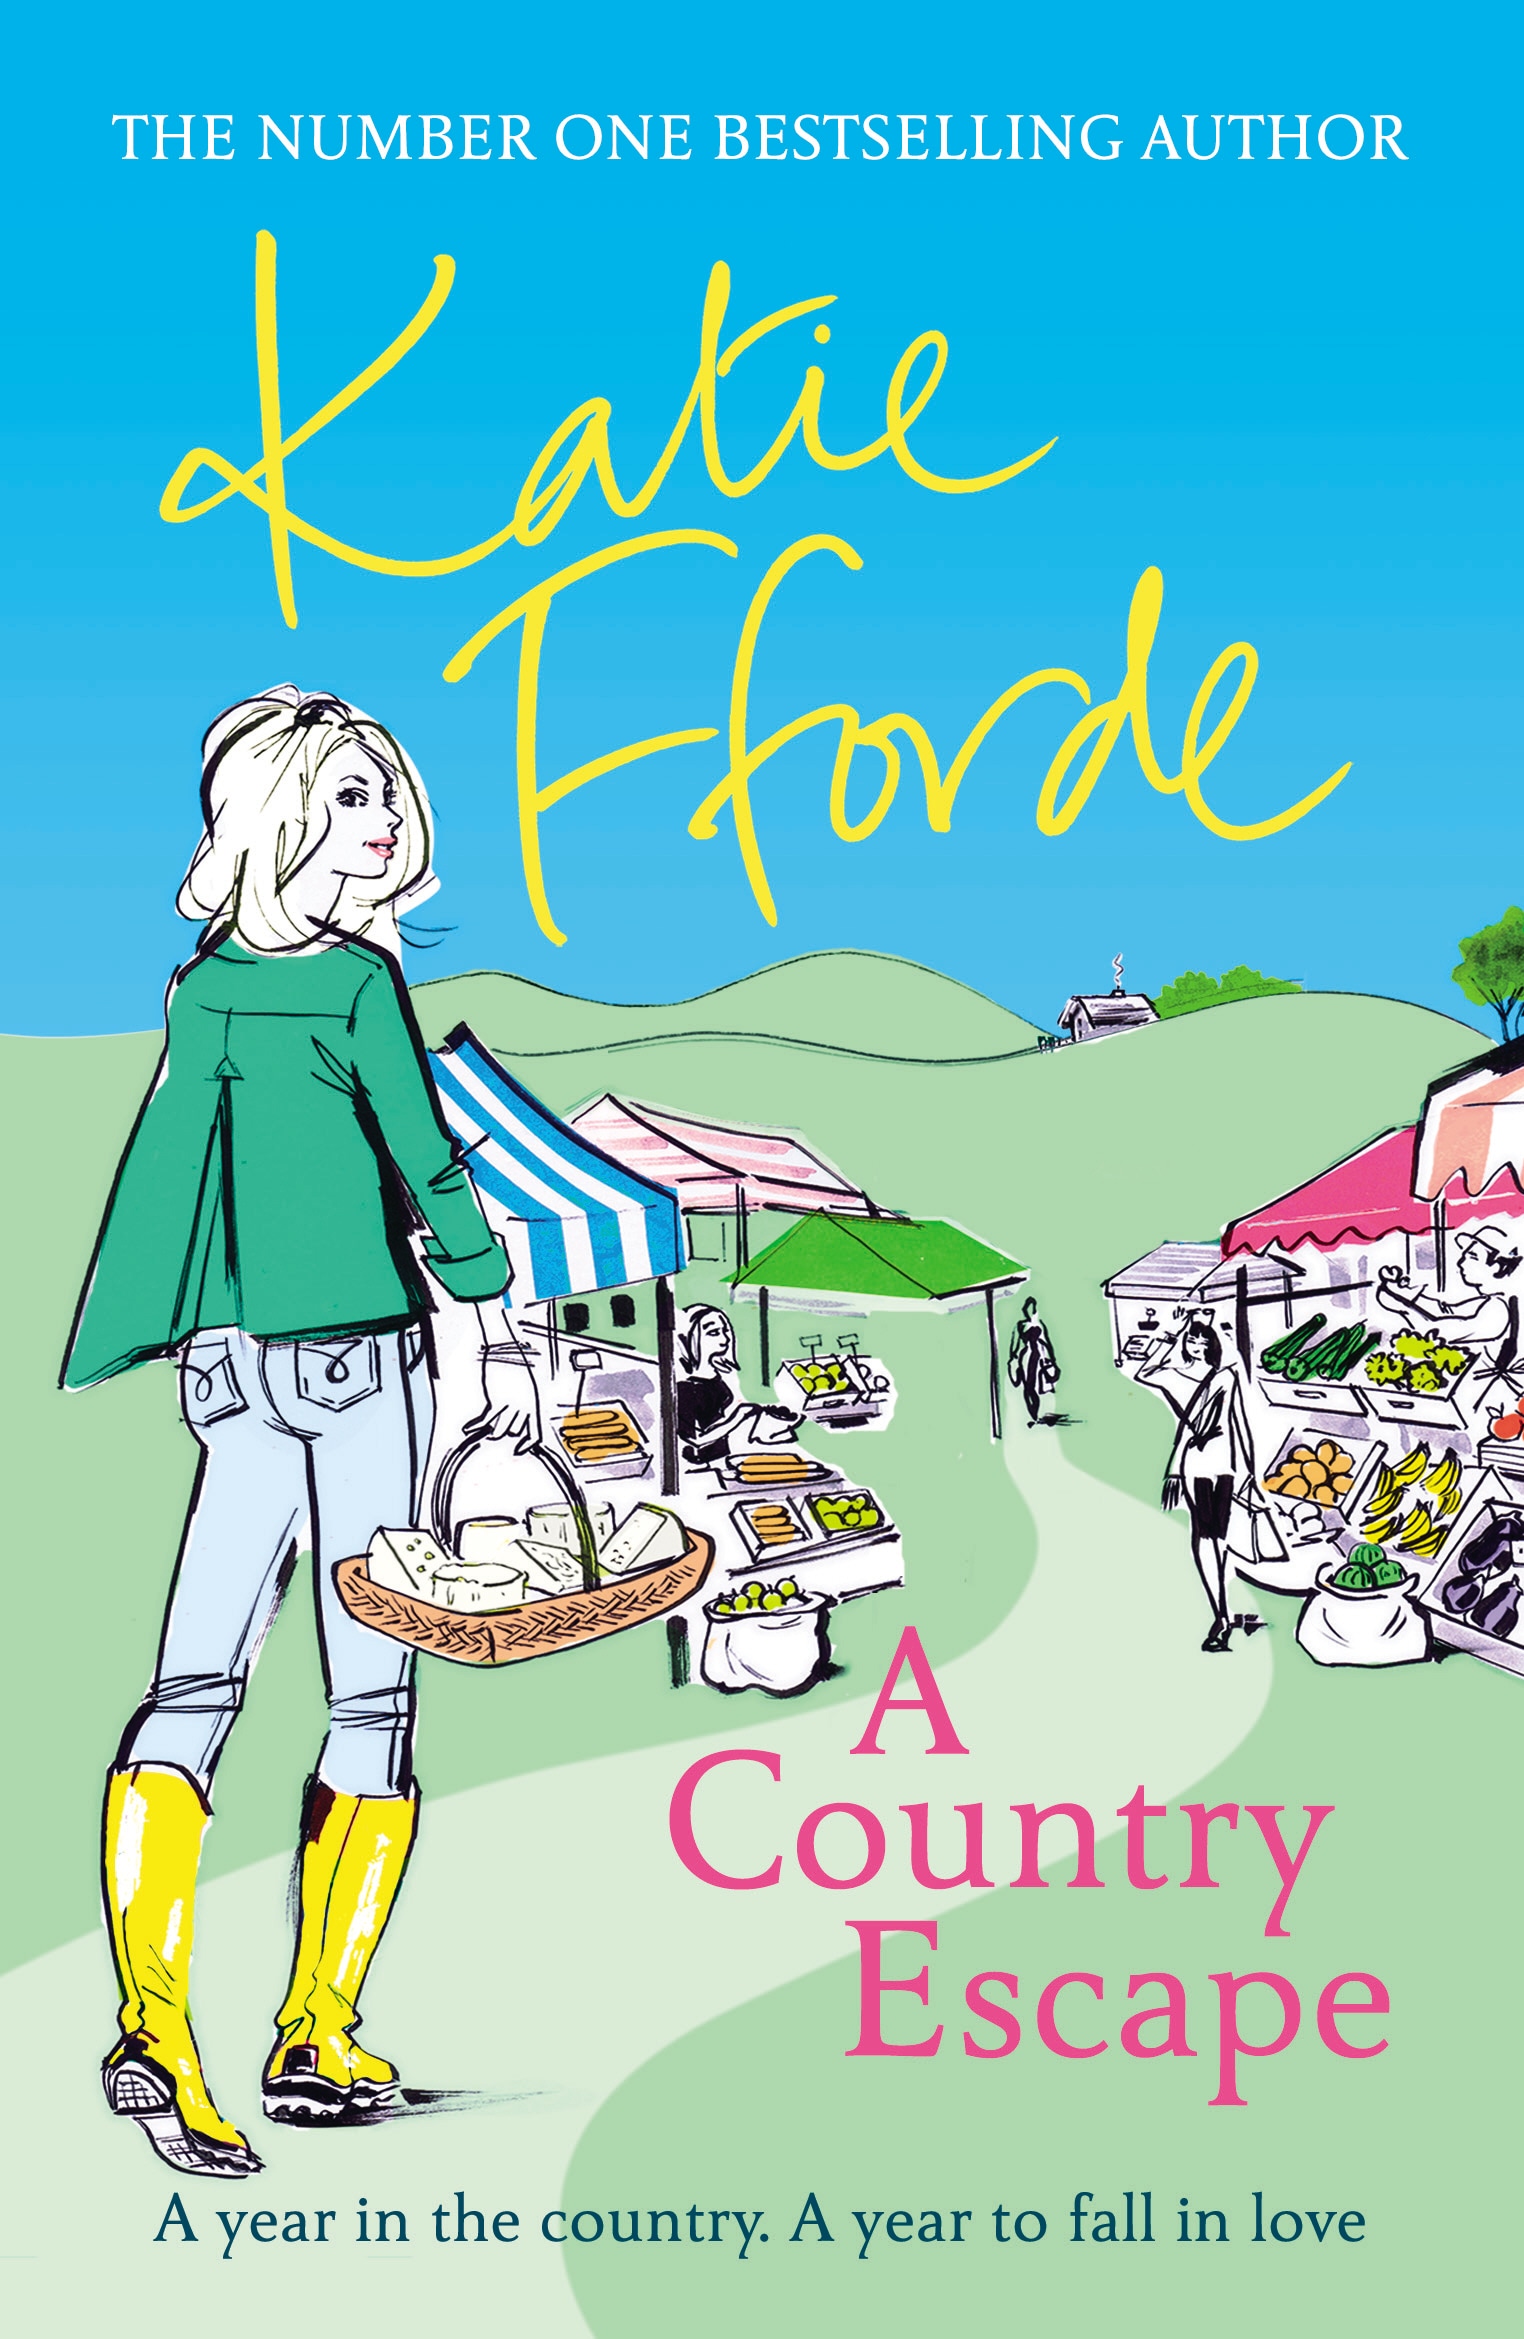 Book “A Country Escape” by Katie Fforde — February 21, 2019